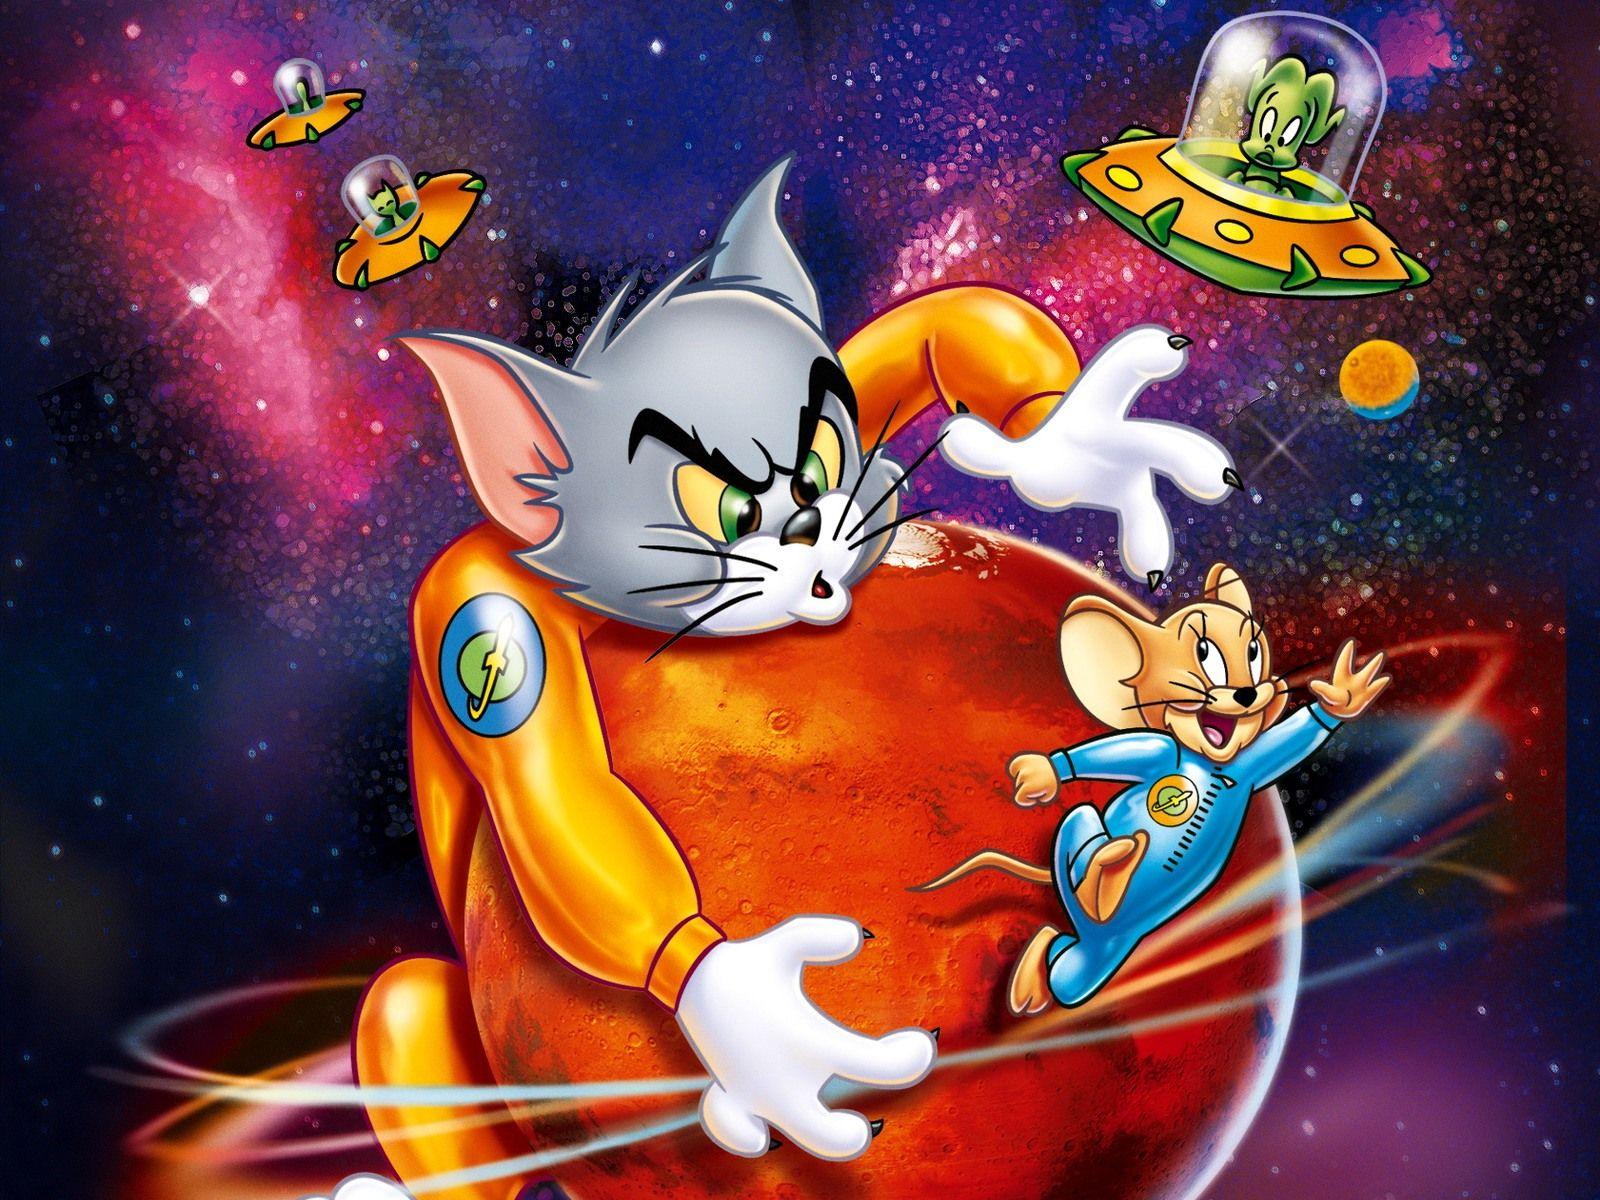 Tom and Jerry Full HD Wallpaper Image for Android